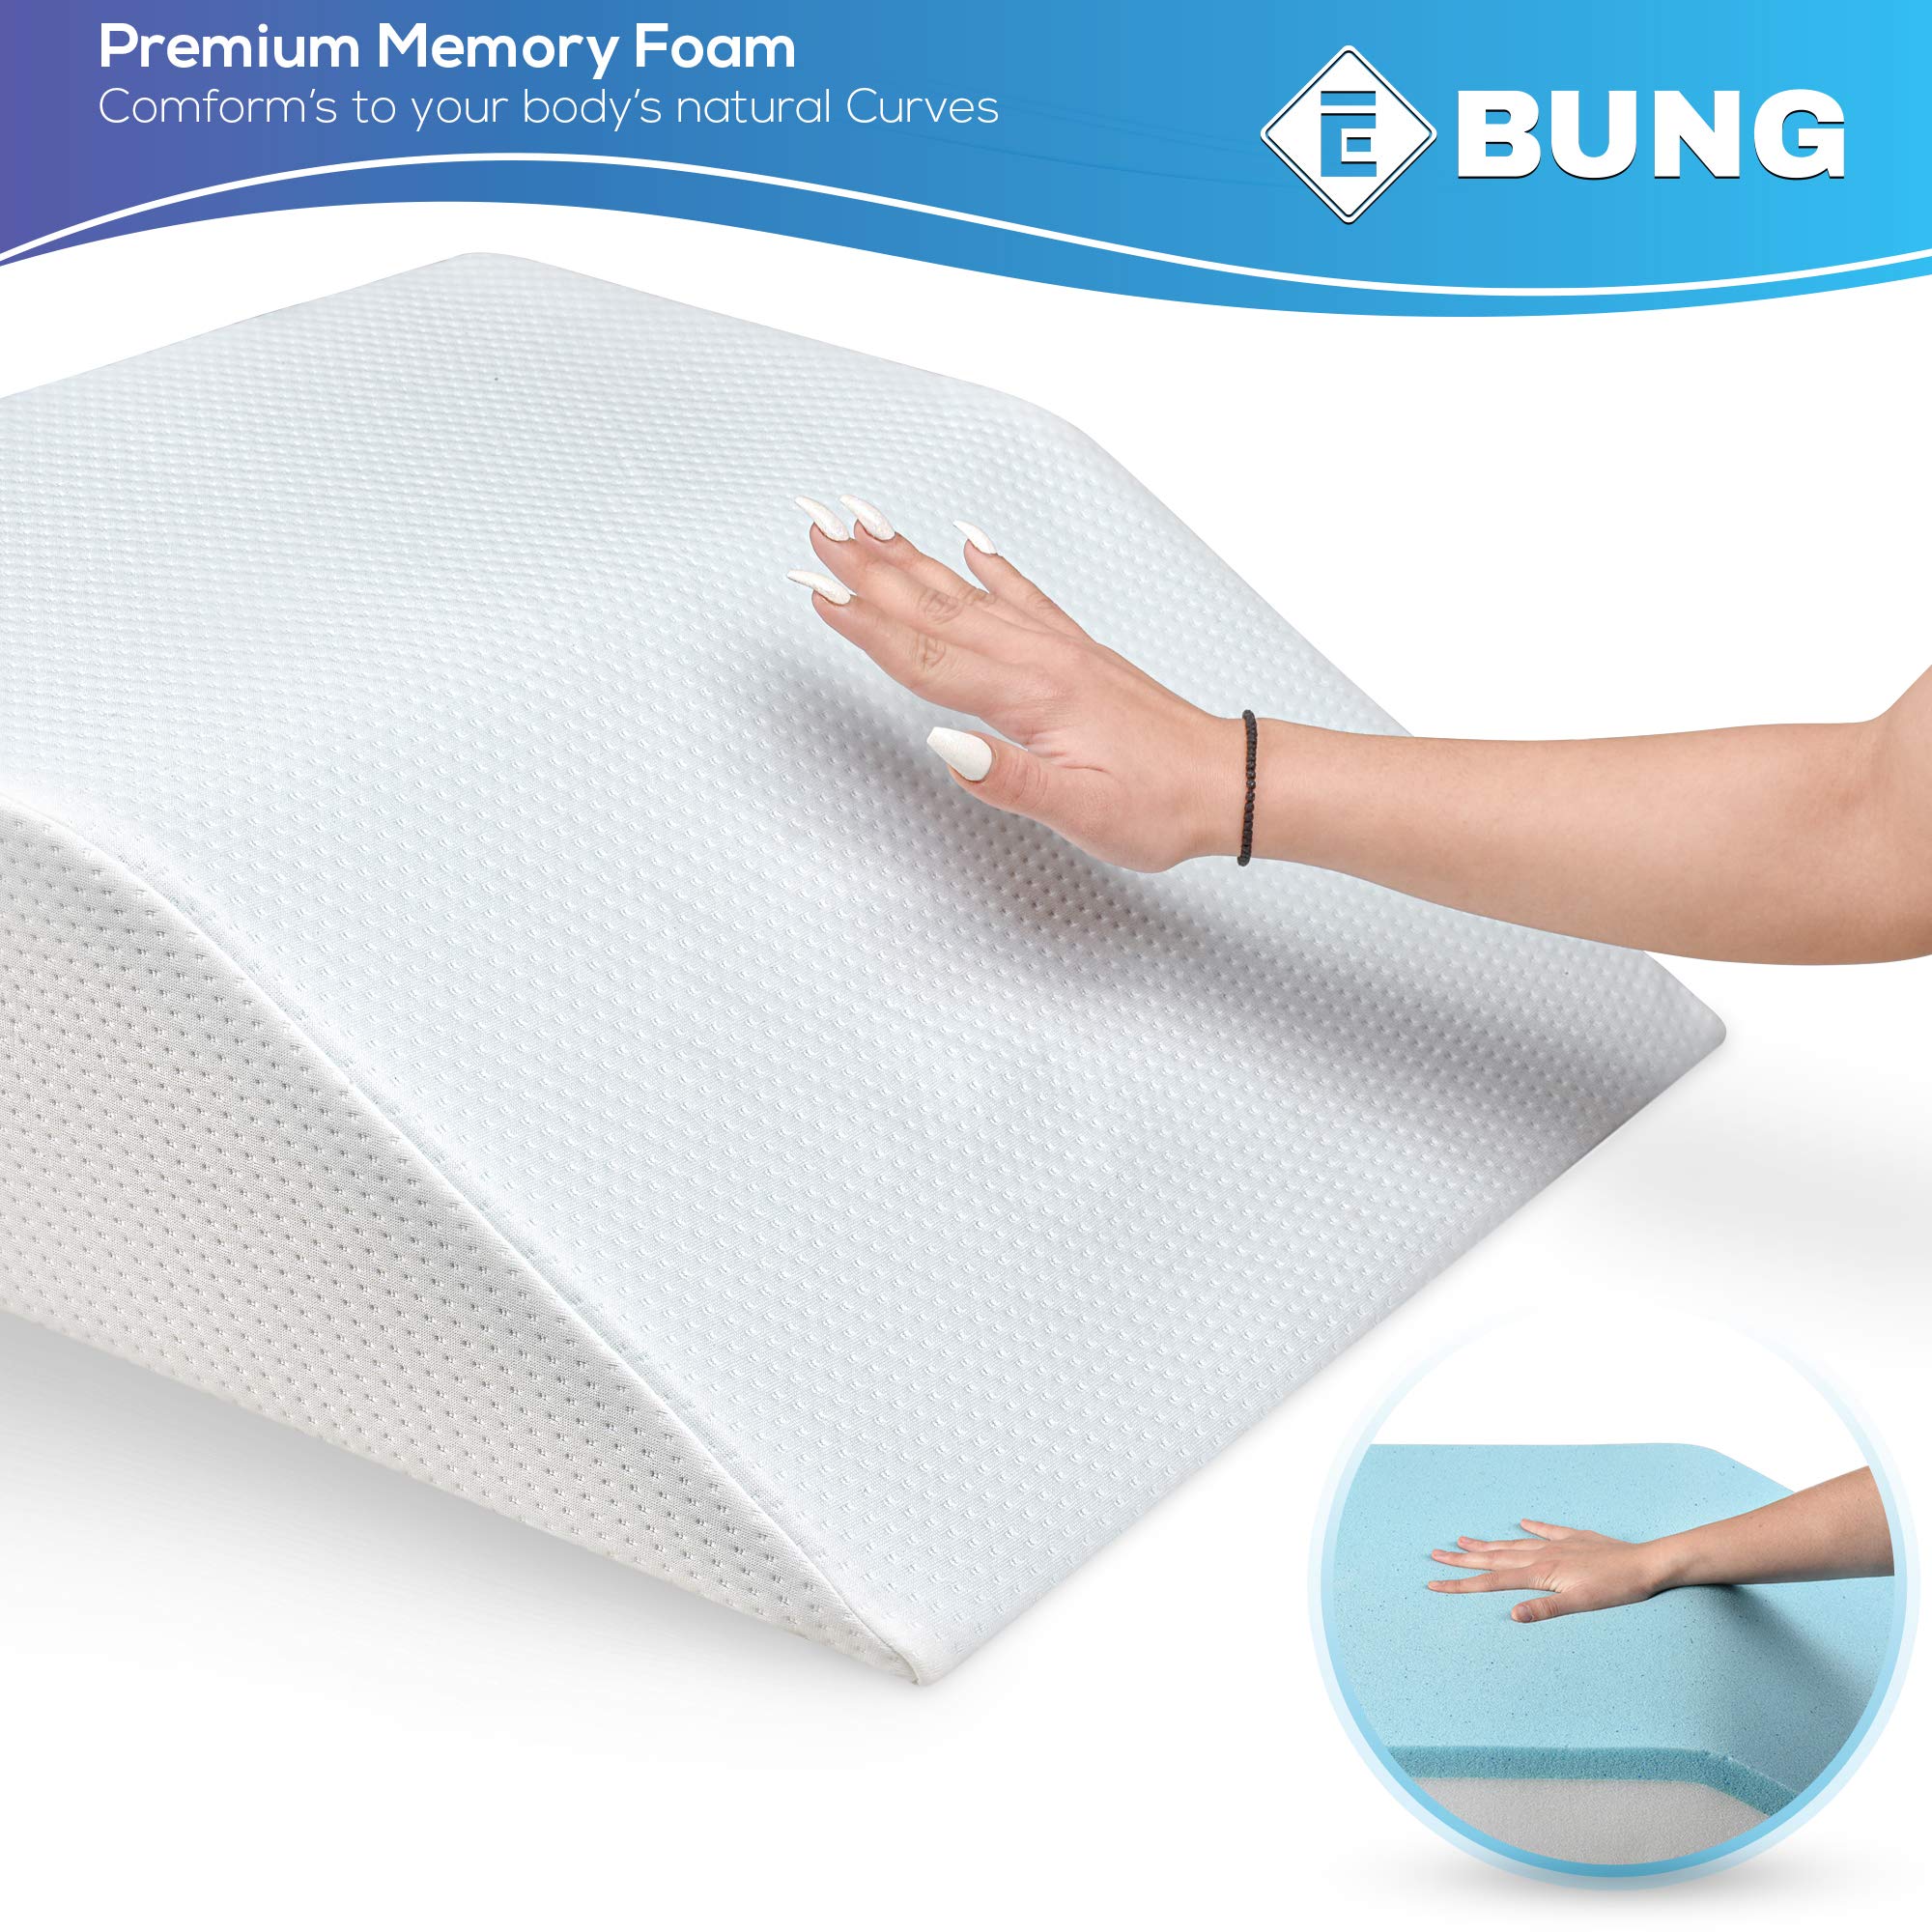 Ebung Leg Elevation Memory Foam Pillow with Removeable, Washable Cover  - Good